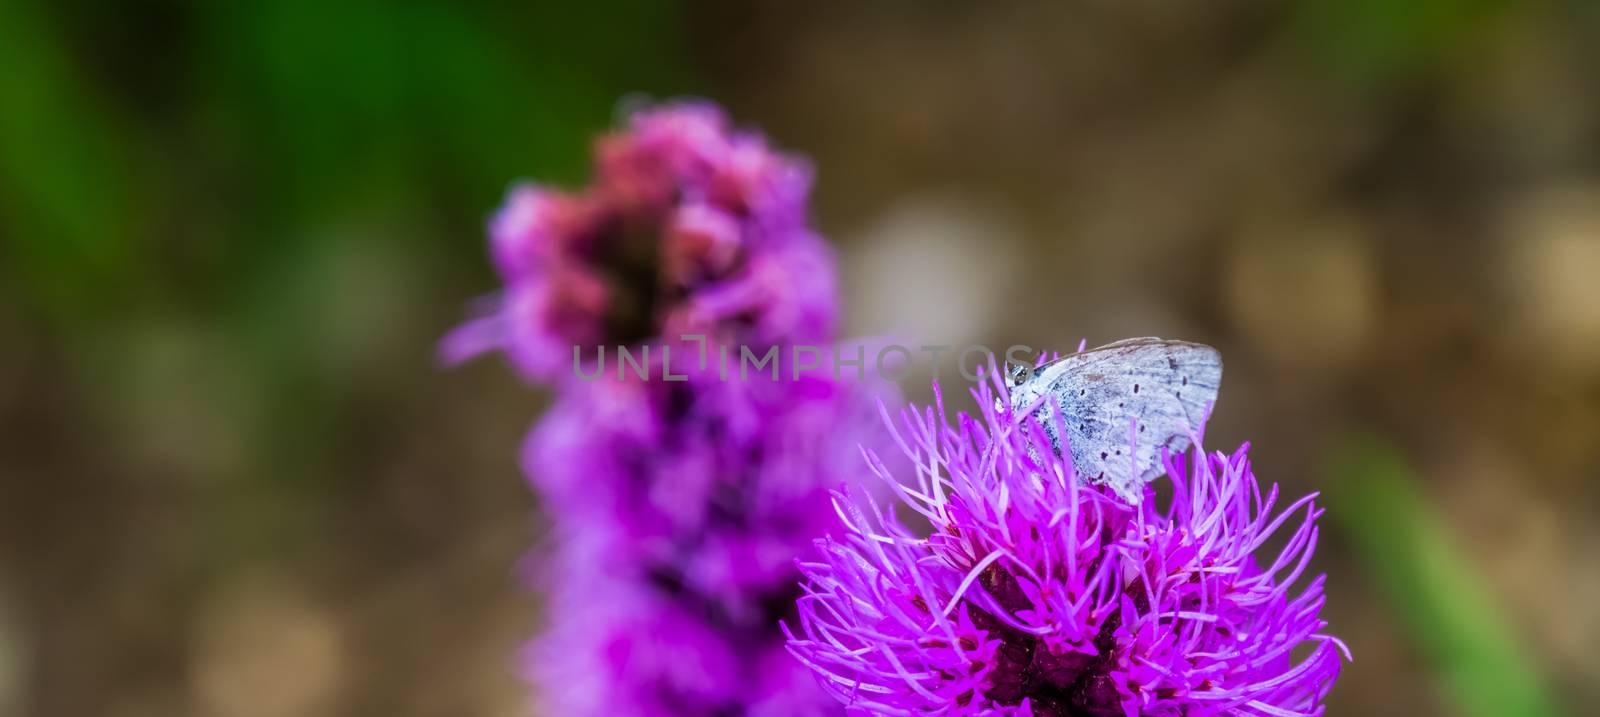 Holly blue butterfly in macro closeup, common insect specie from Eurasia